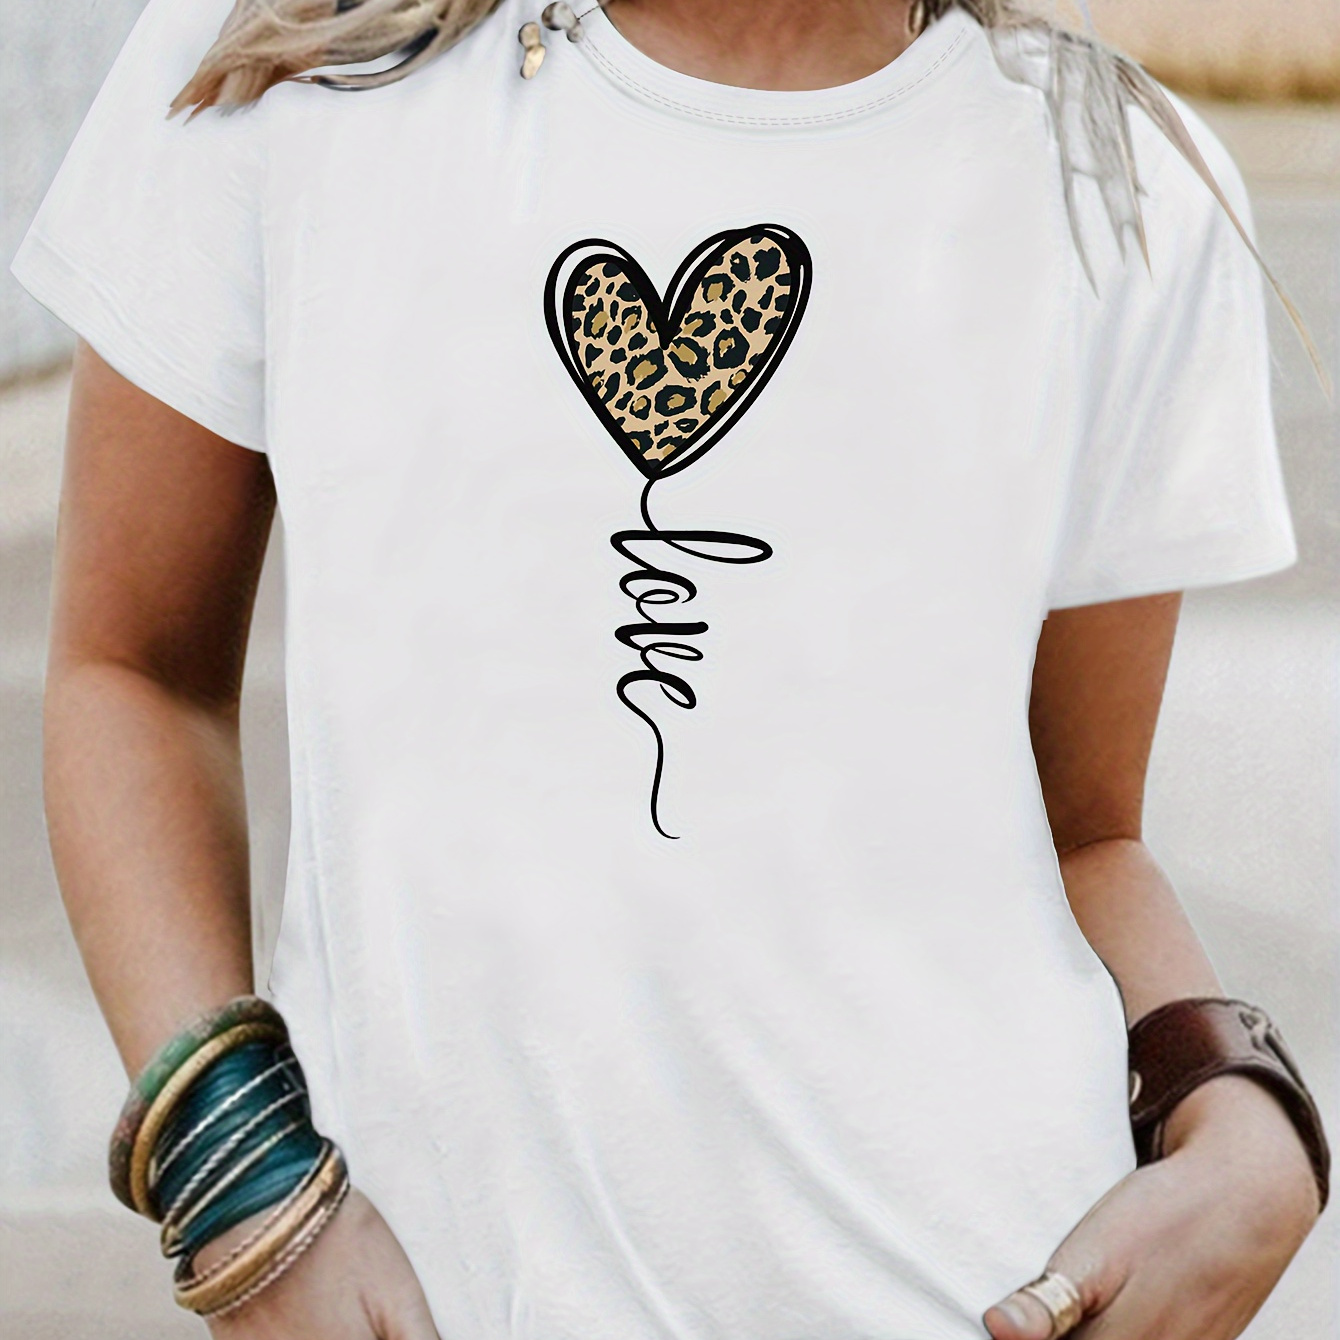 

Leopard Heart & Love Print T-shirt, Casual Crew Neck Short Sleeve Top For Spring & Summer, Women's Clothing, Valentine's Day